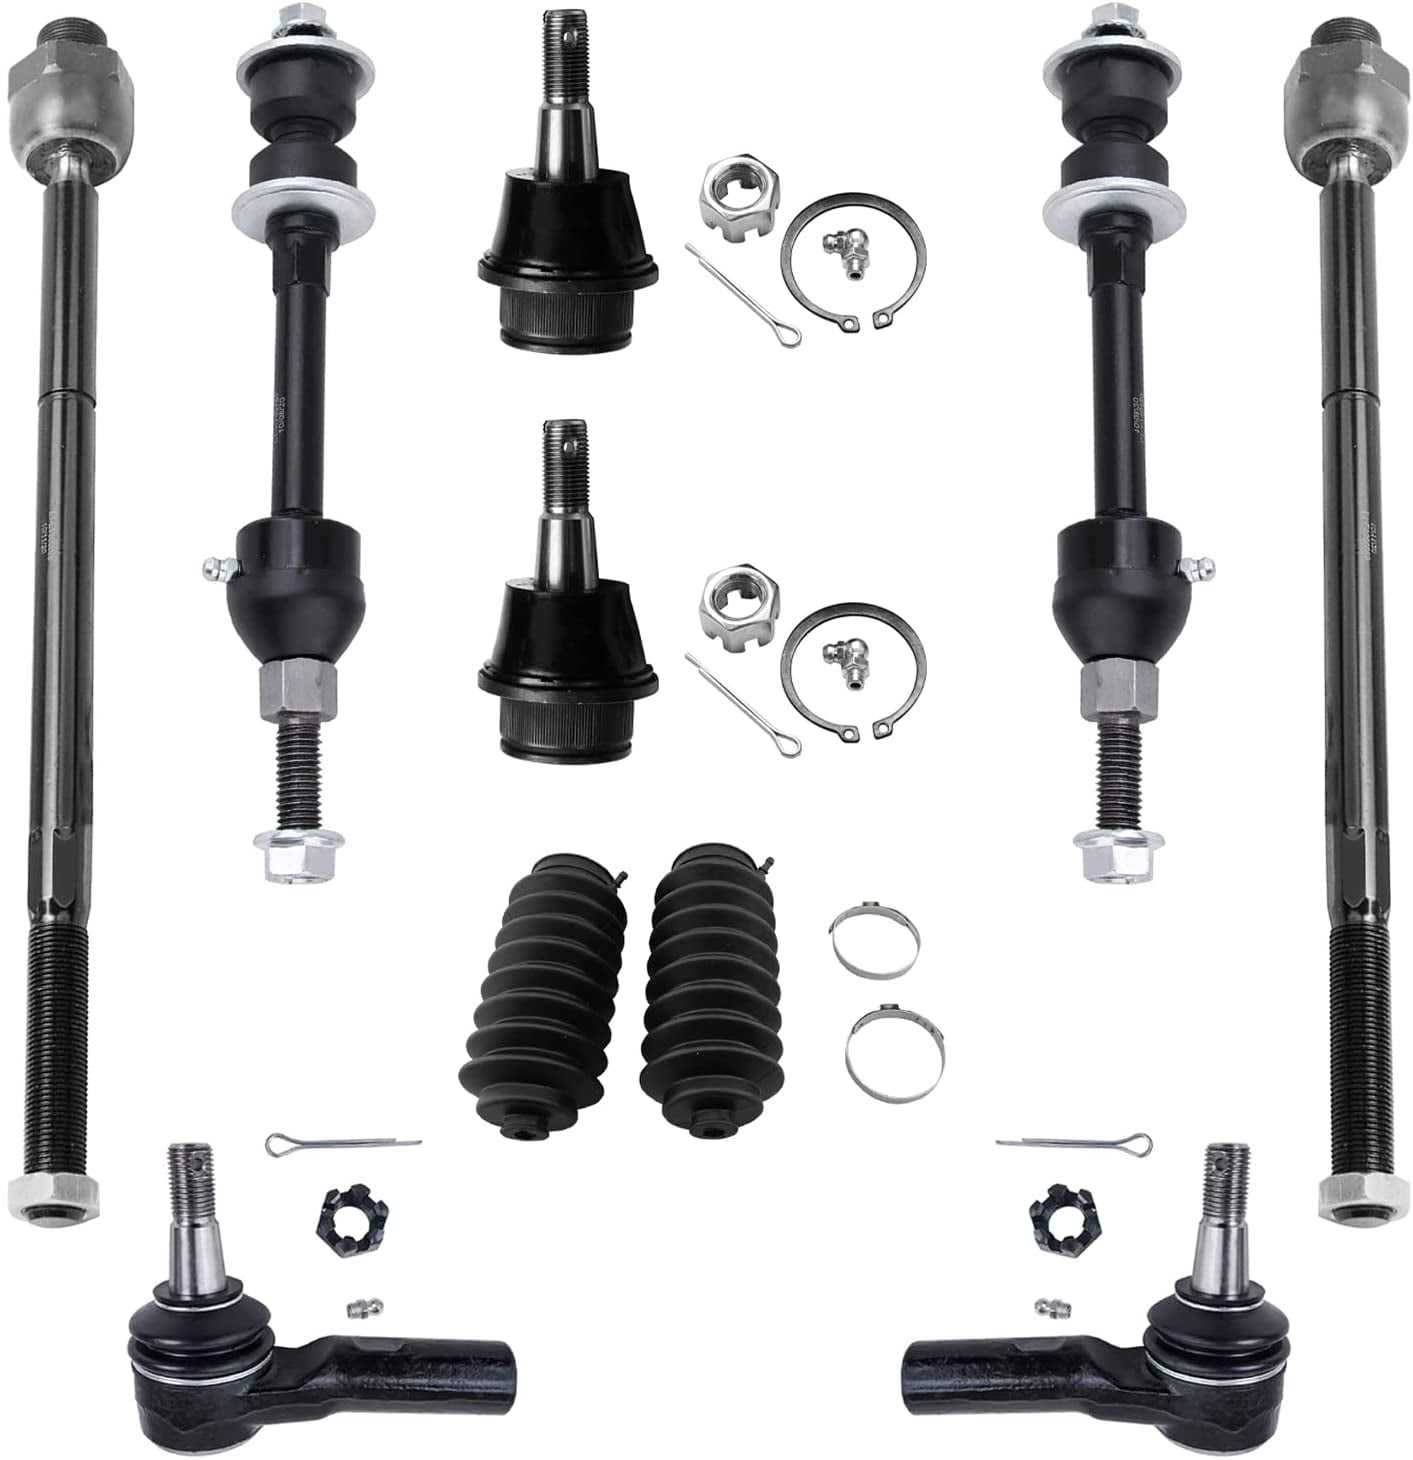 Bellow Boots PartsW 10 Pc New Suspension Kit for Dodge Ram 1500 & Ram 1500 / Front Lower Ball Joints Inner and Outer Tie Rod End Sway Bars End Link 